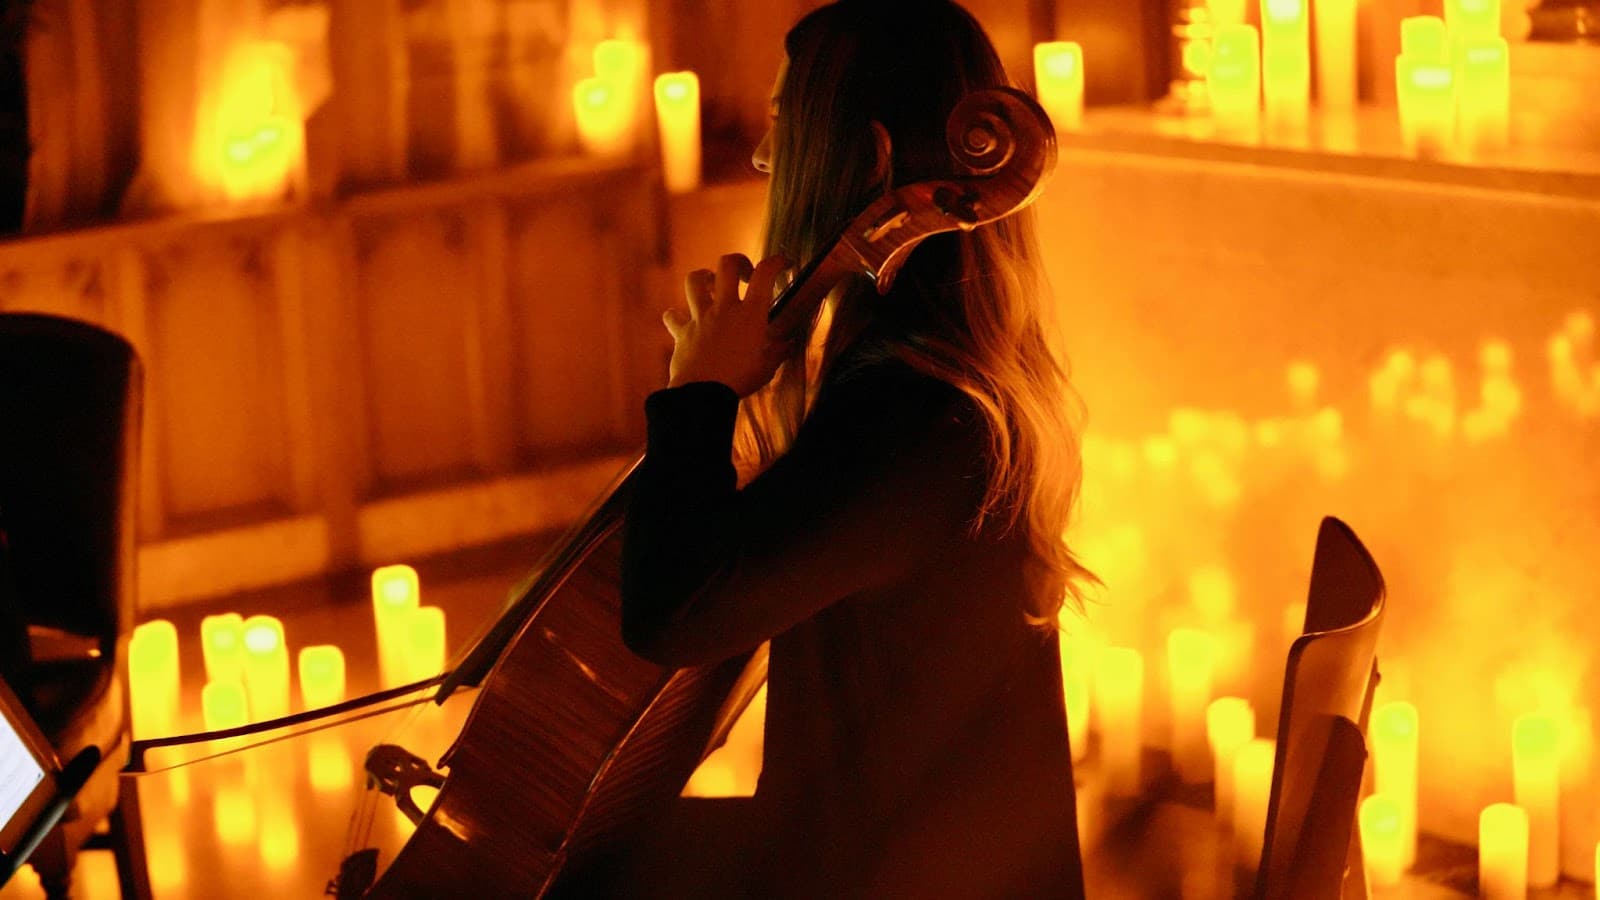 A cellist plays by candlelight